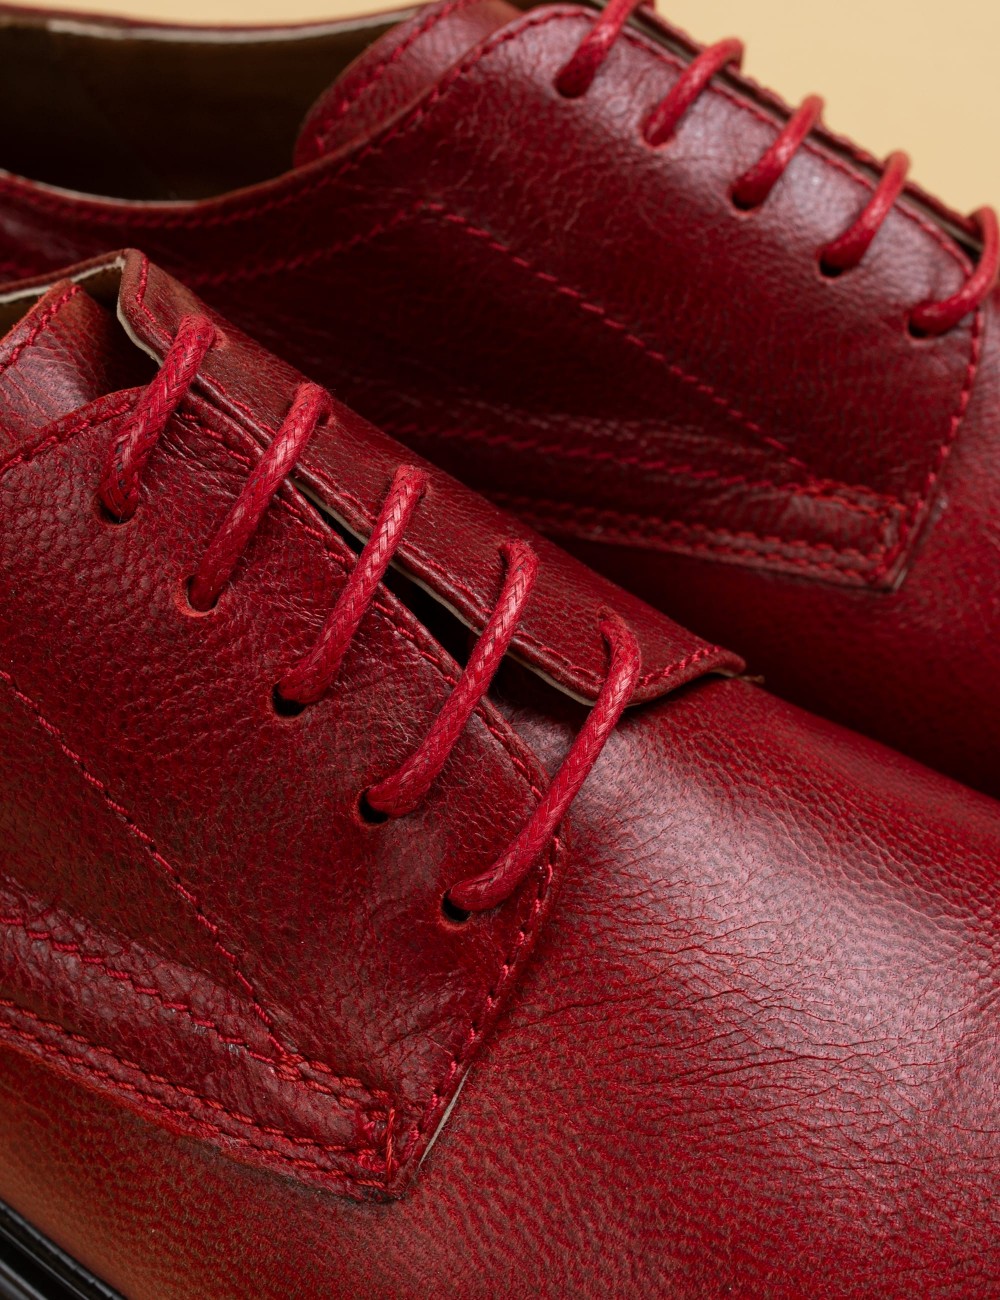 Red  Leather Lace-up Shoes - 01430ZKRMP01